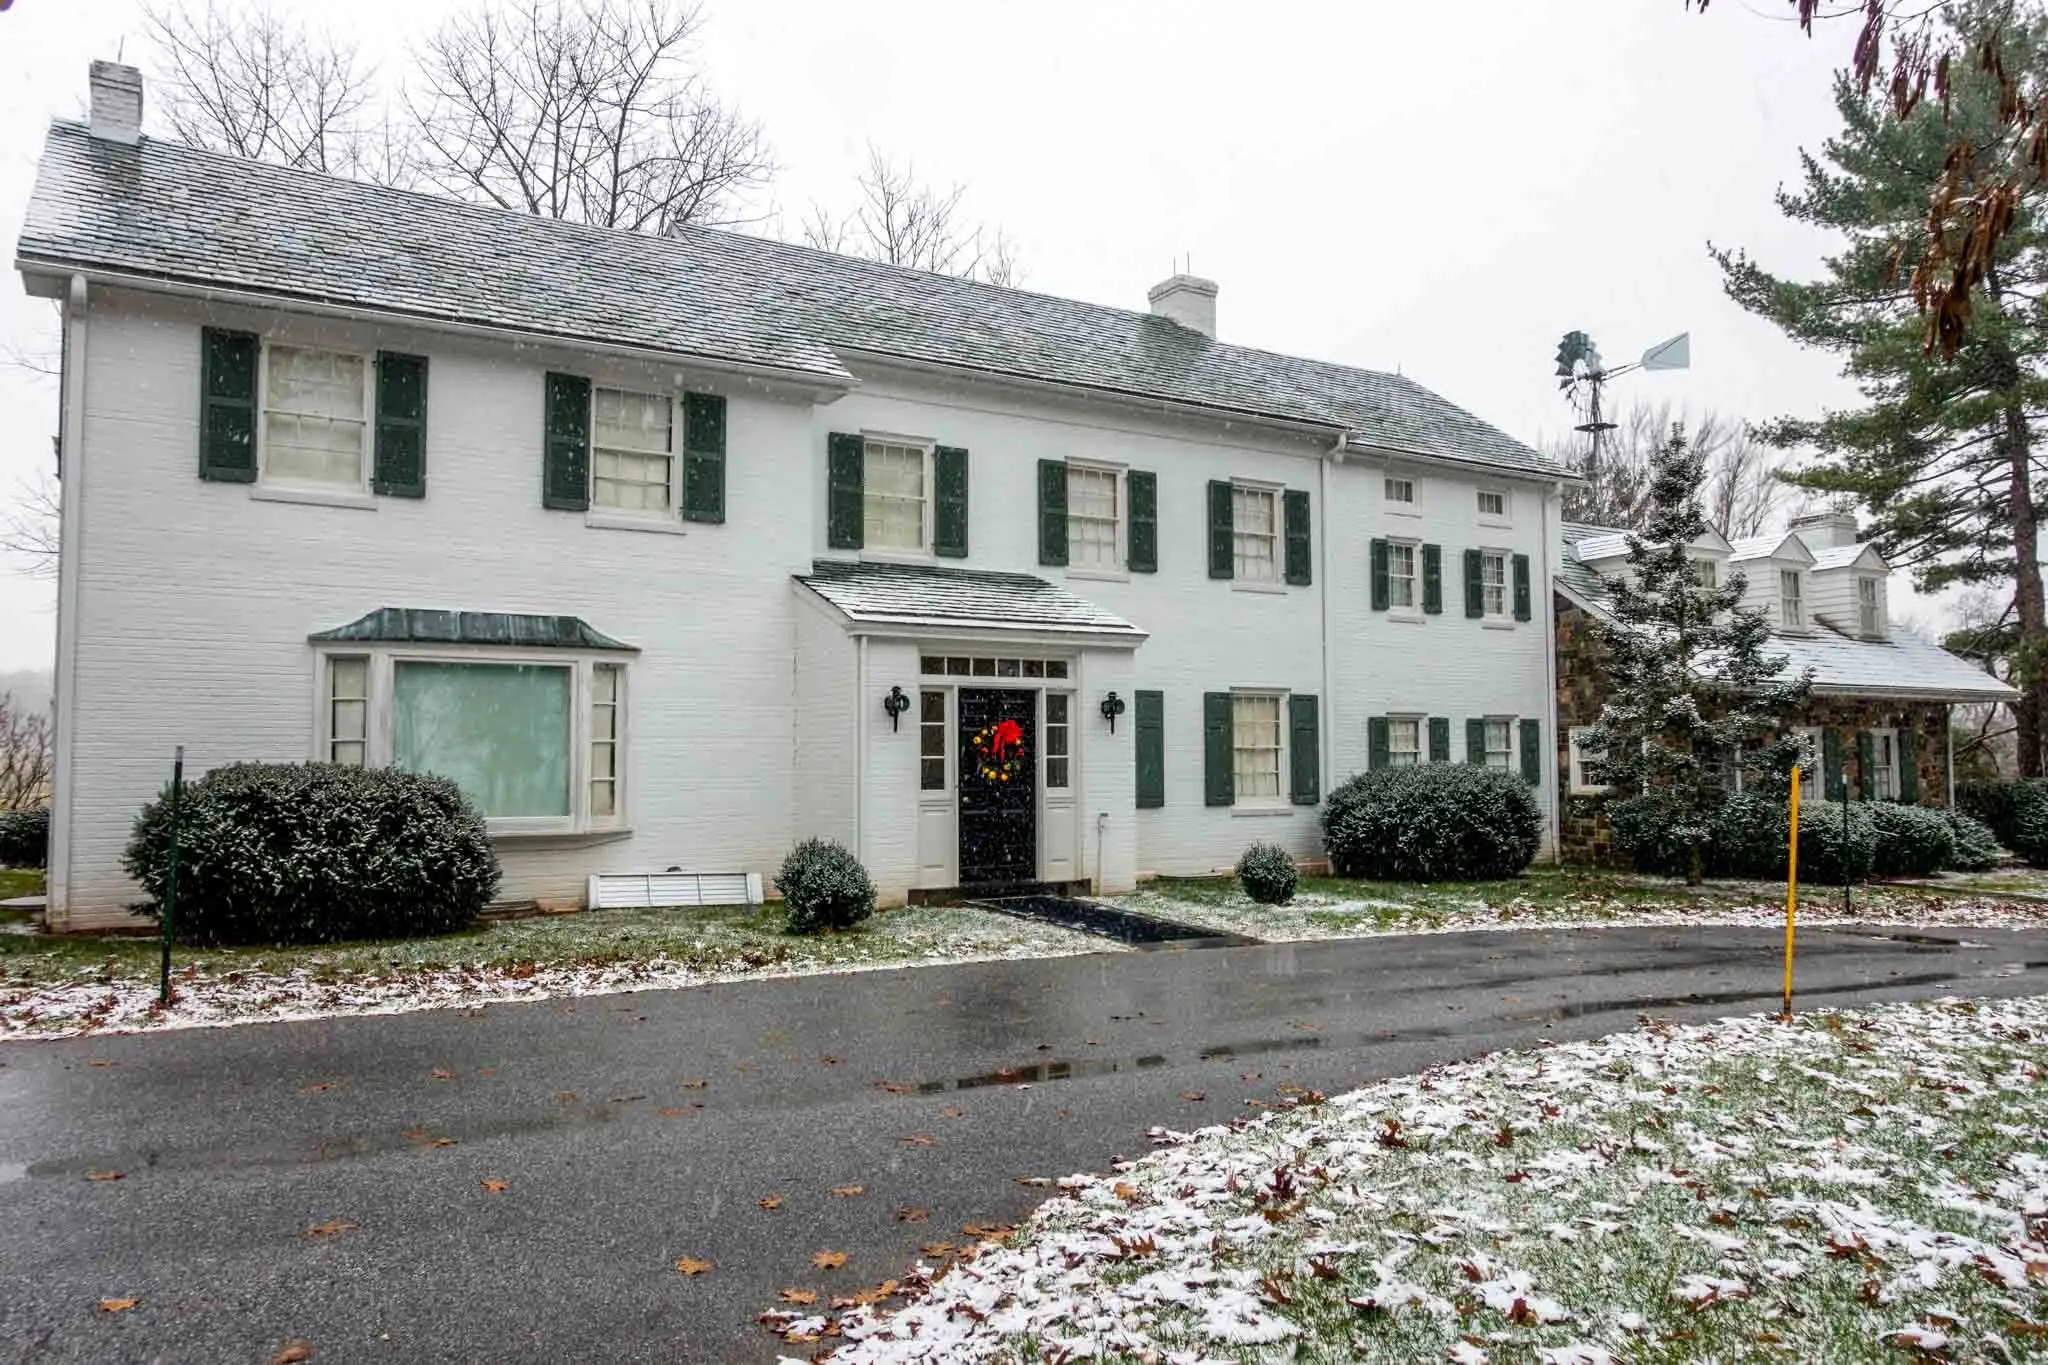 Exterior of a white brick house and snow on the ground 